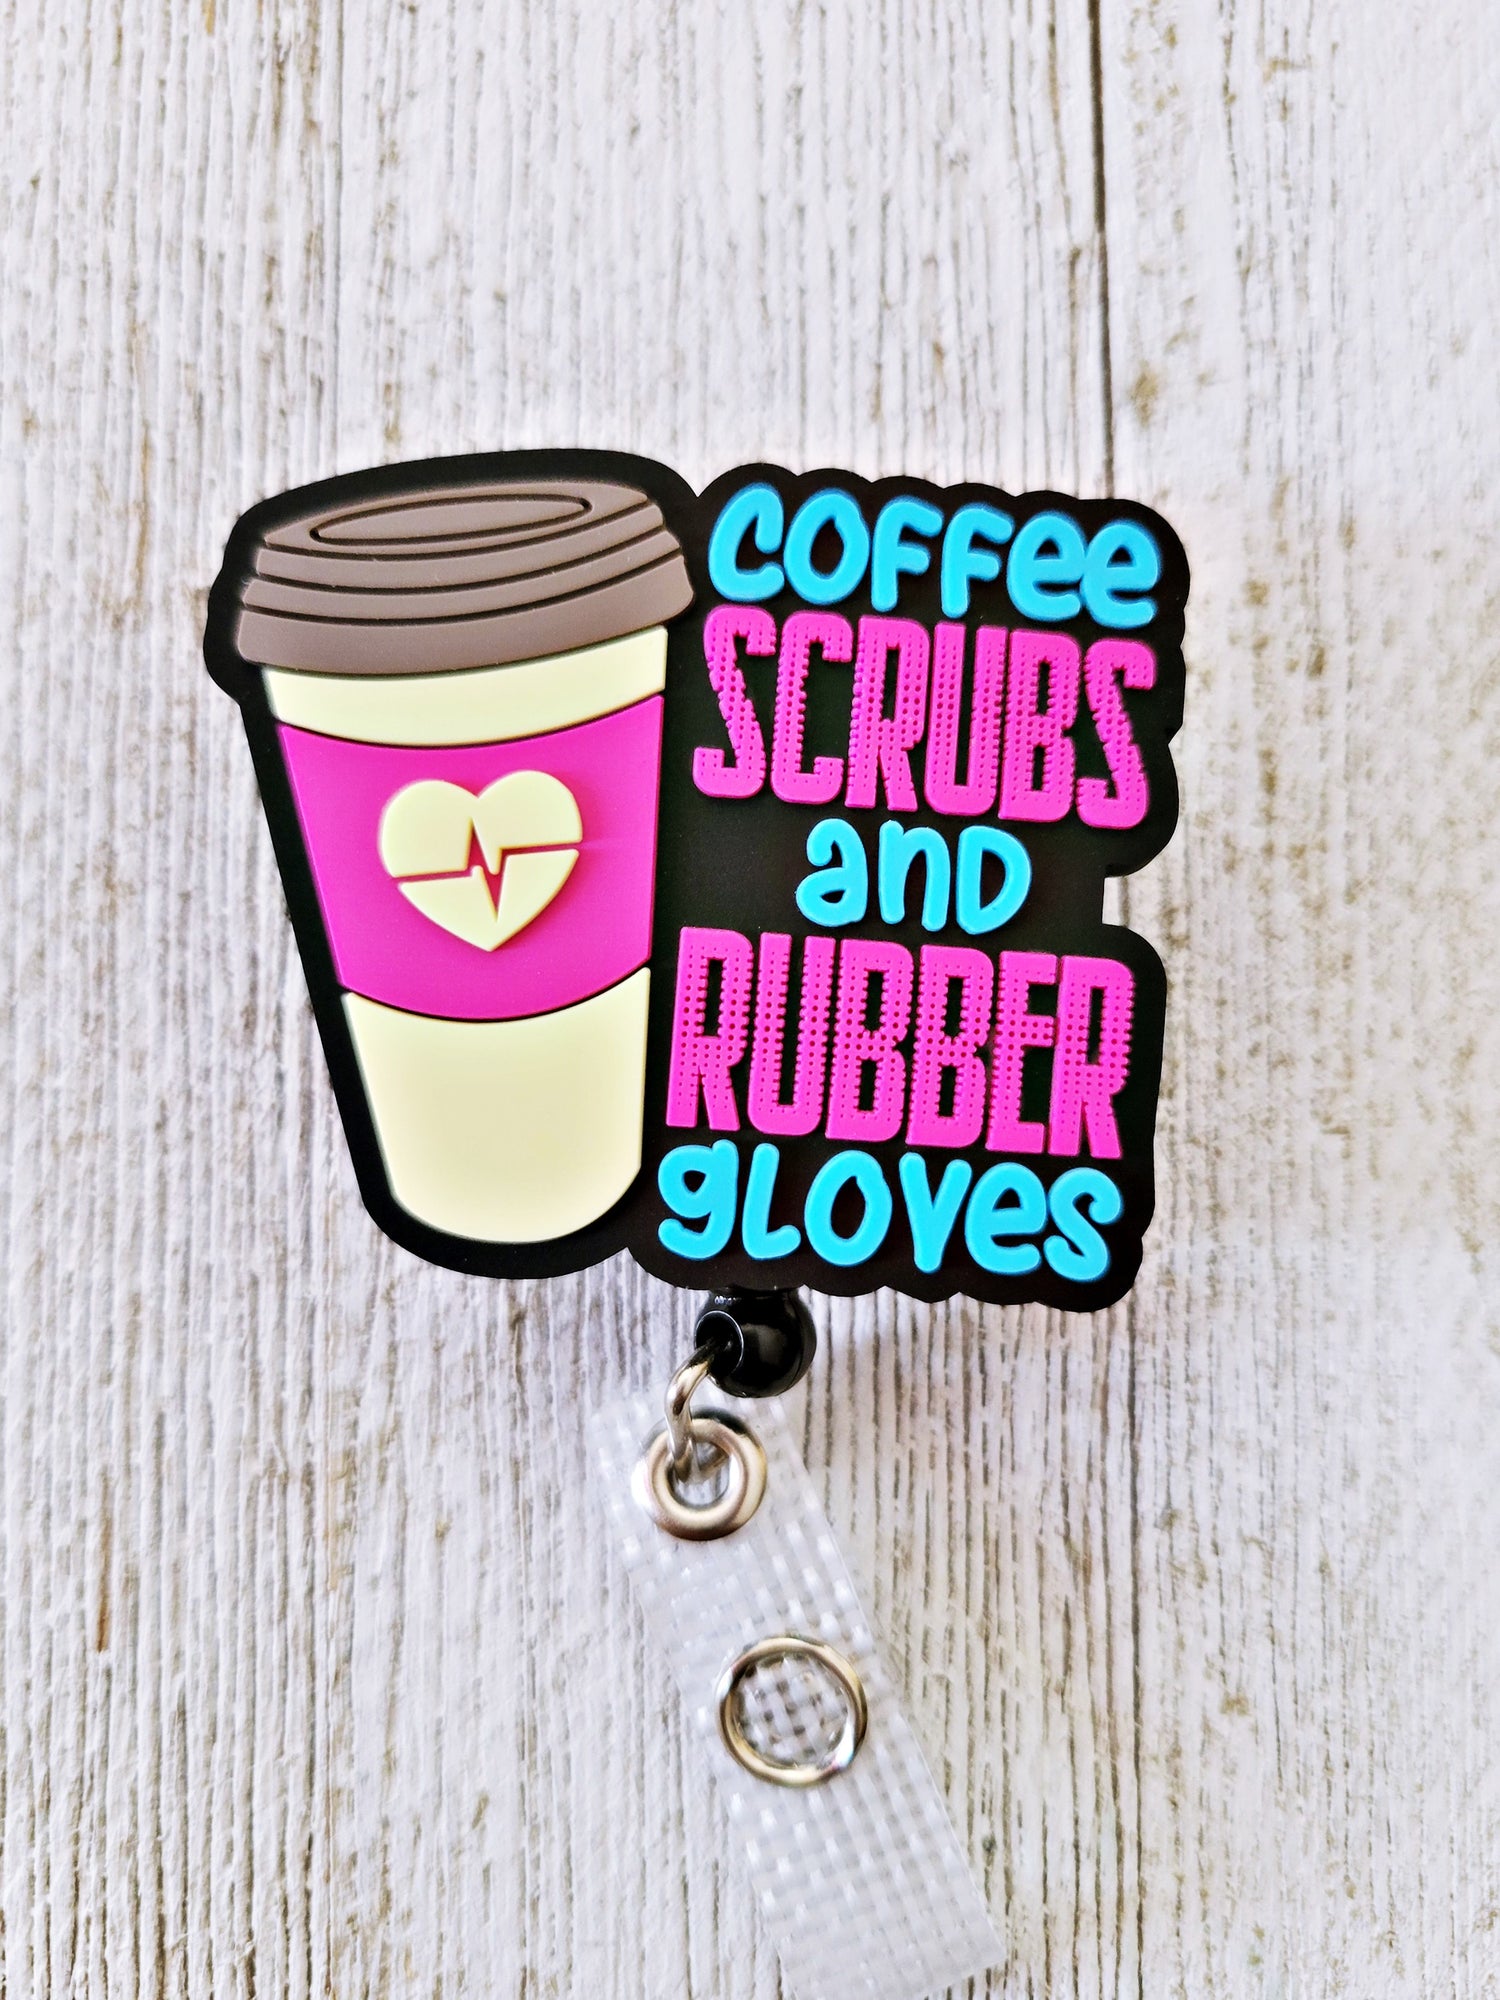 Coffee, Scrubs, and Rubber Gloves Badge Reel